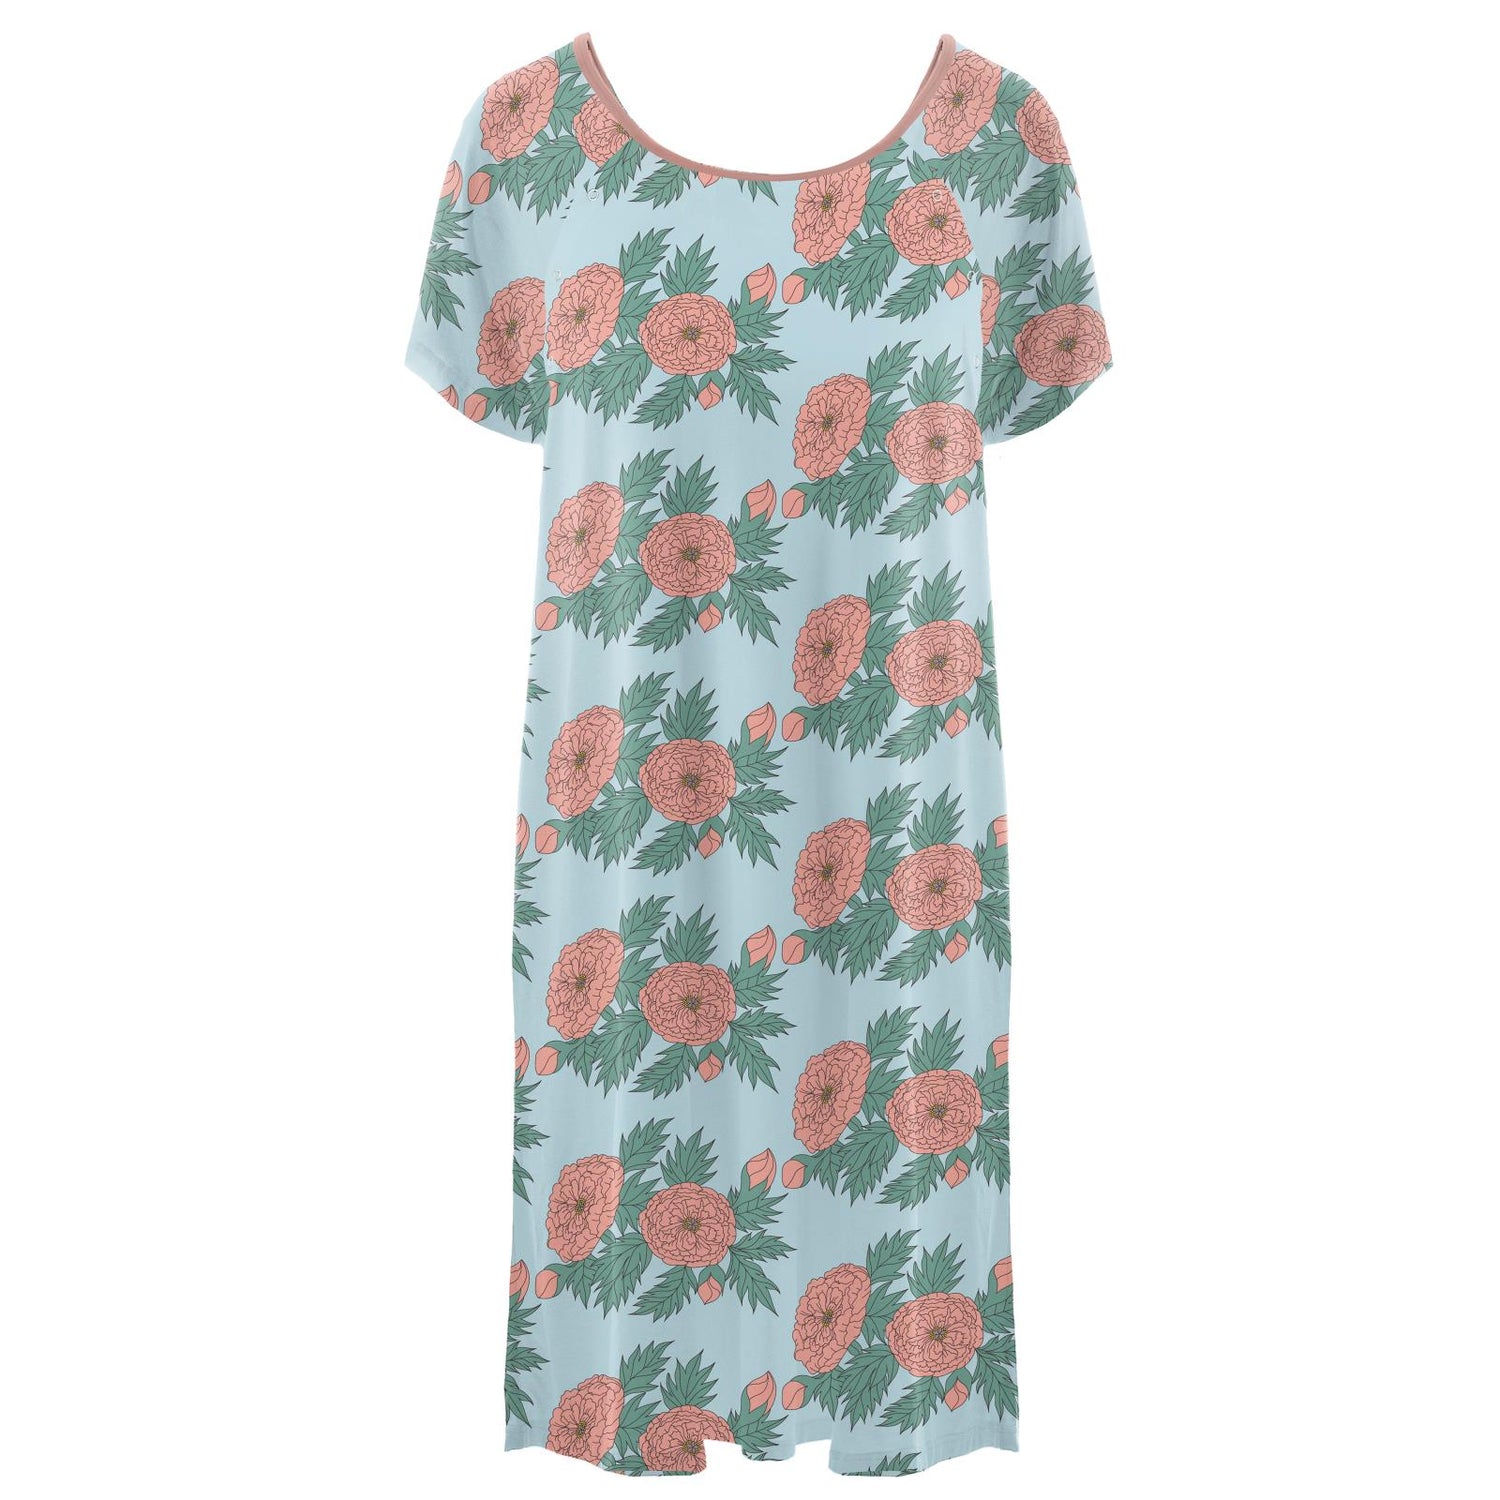 Women's Print Hospital Gown in Spring Sky Floral